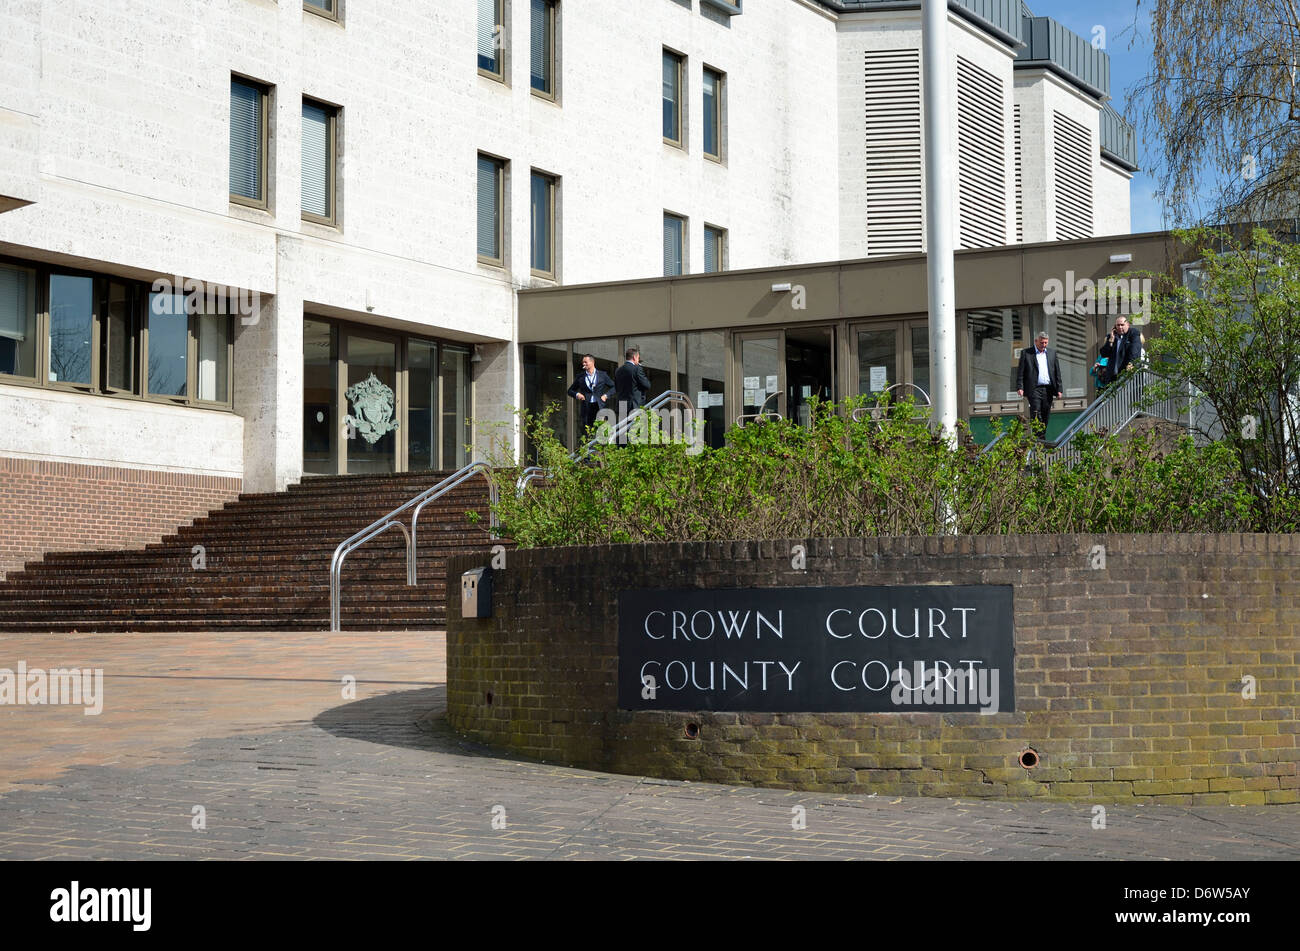 Maidstone, Kent, England, UK. The Law Courts; Crown Court / County Court, by the river. Stock Photo